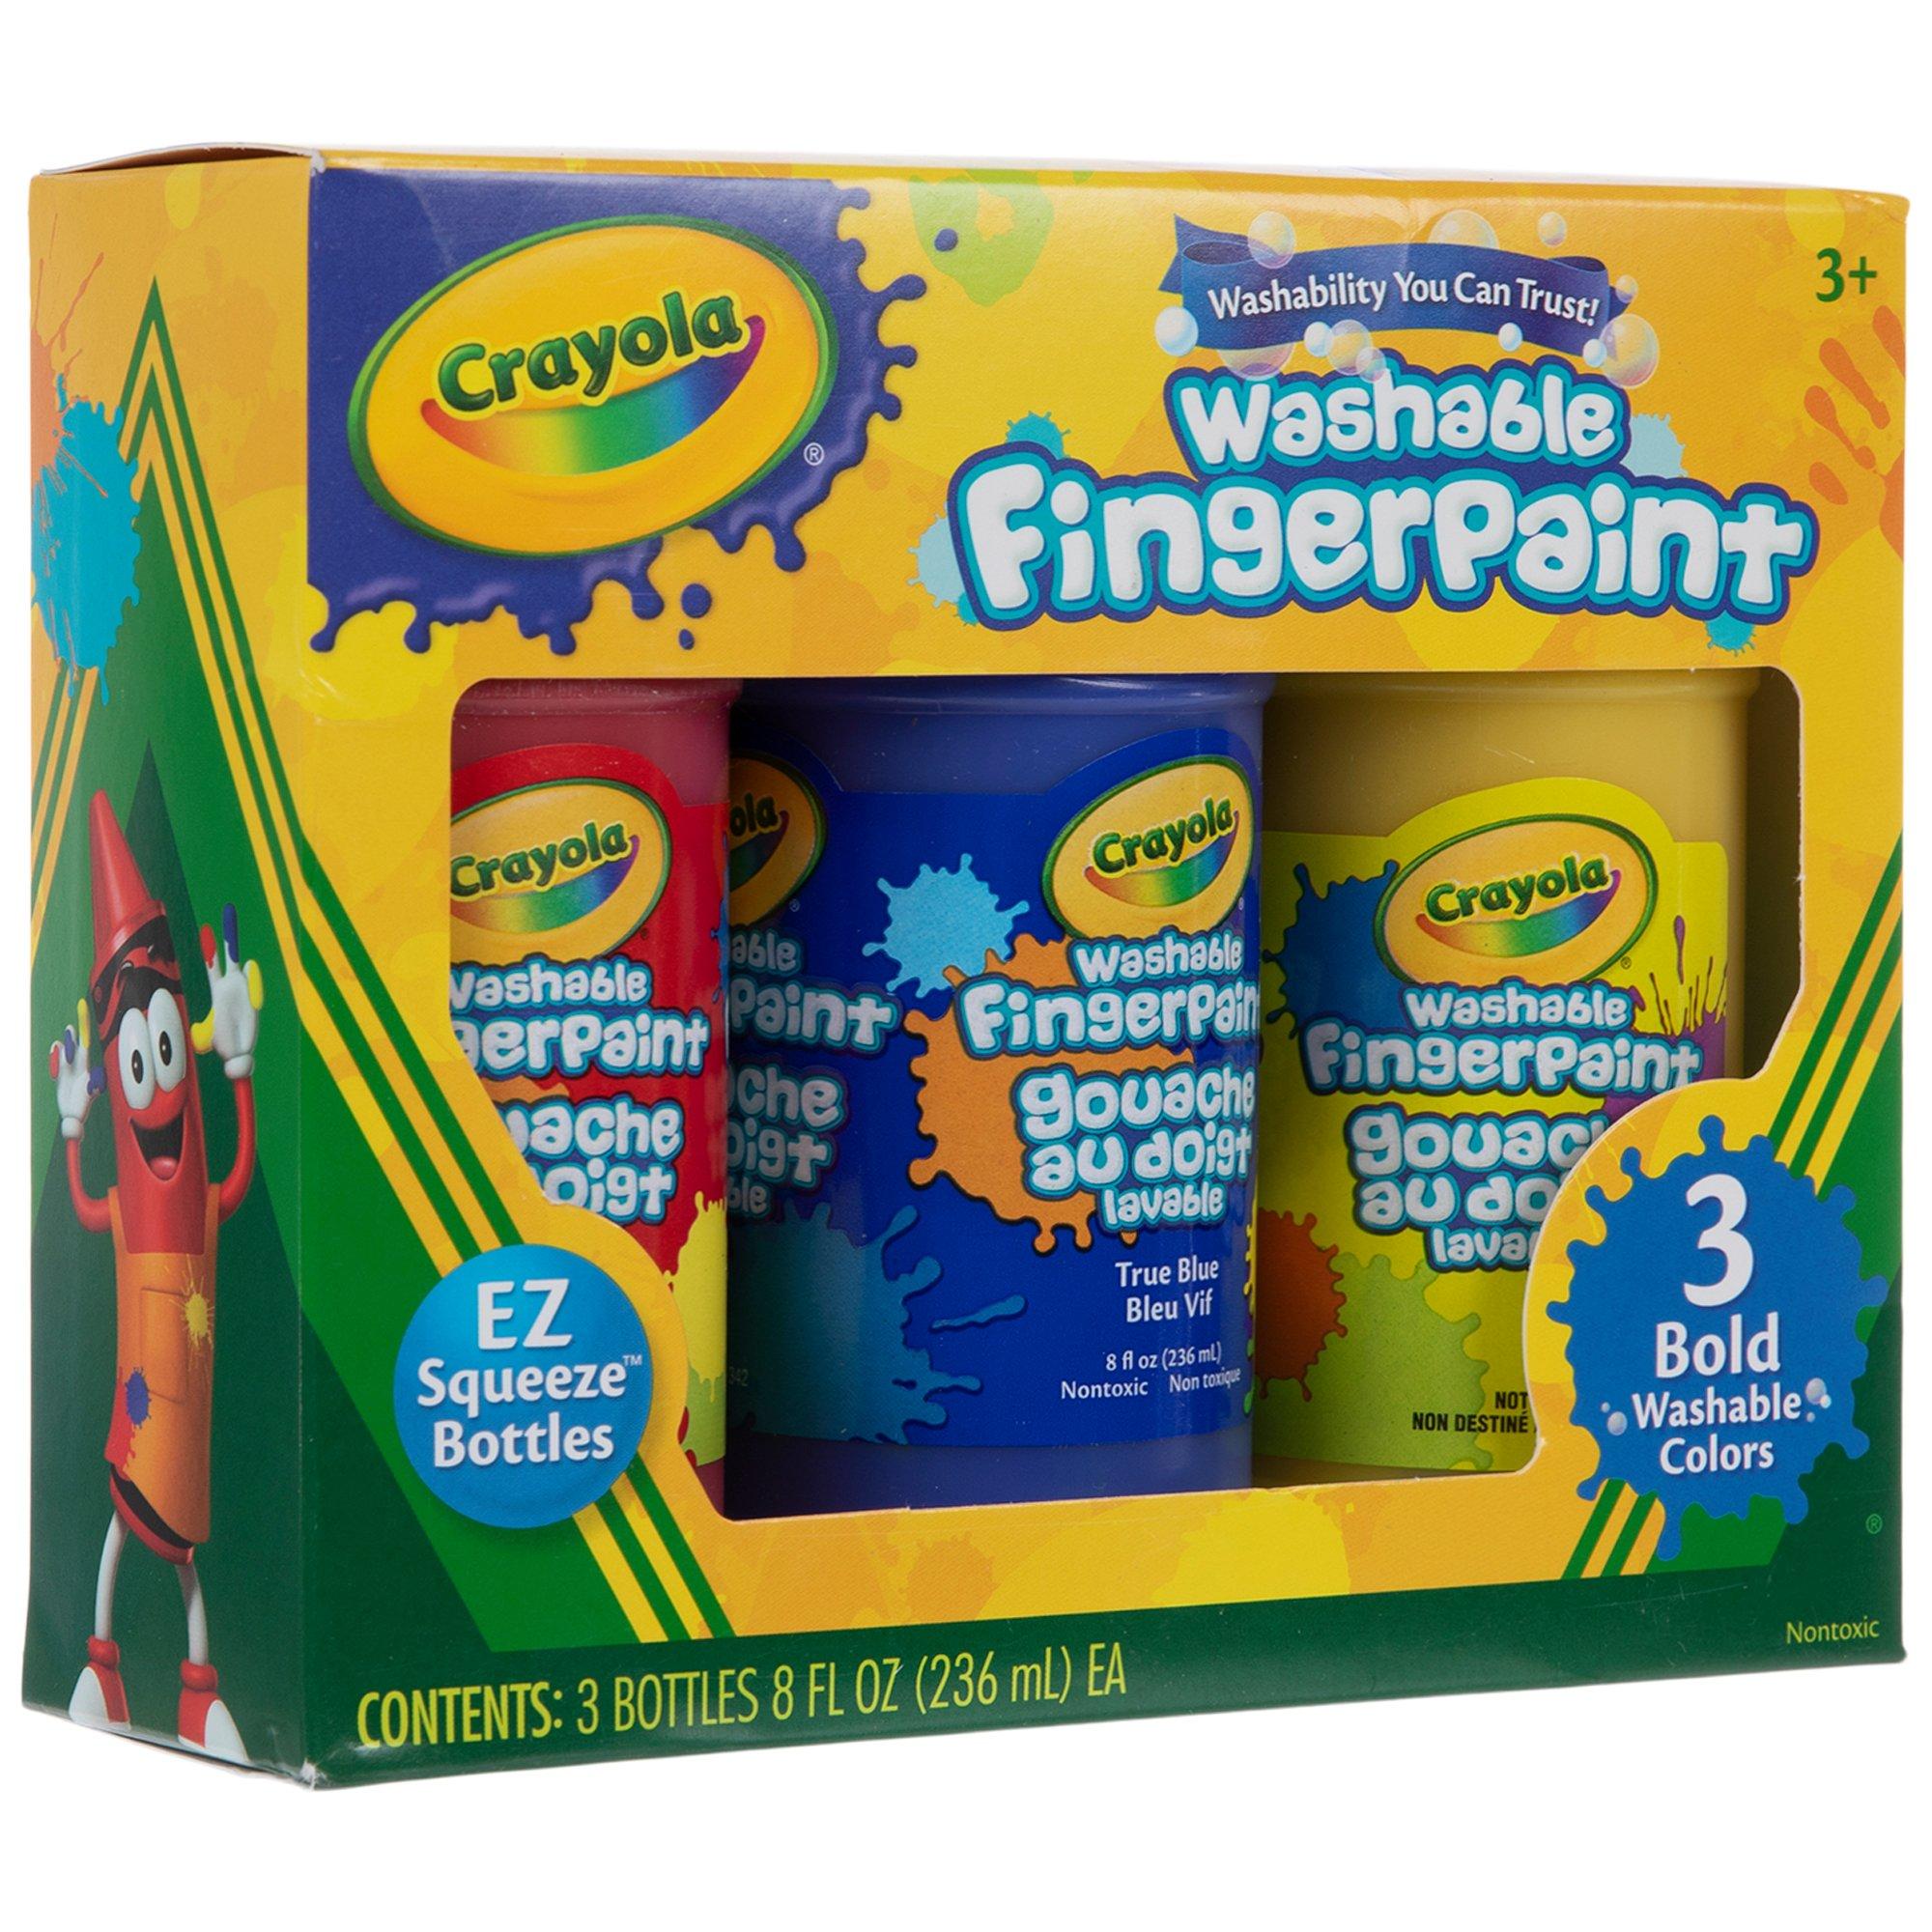 crayola giant finger paint pad – A Paper Hat